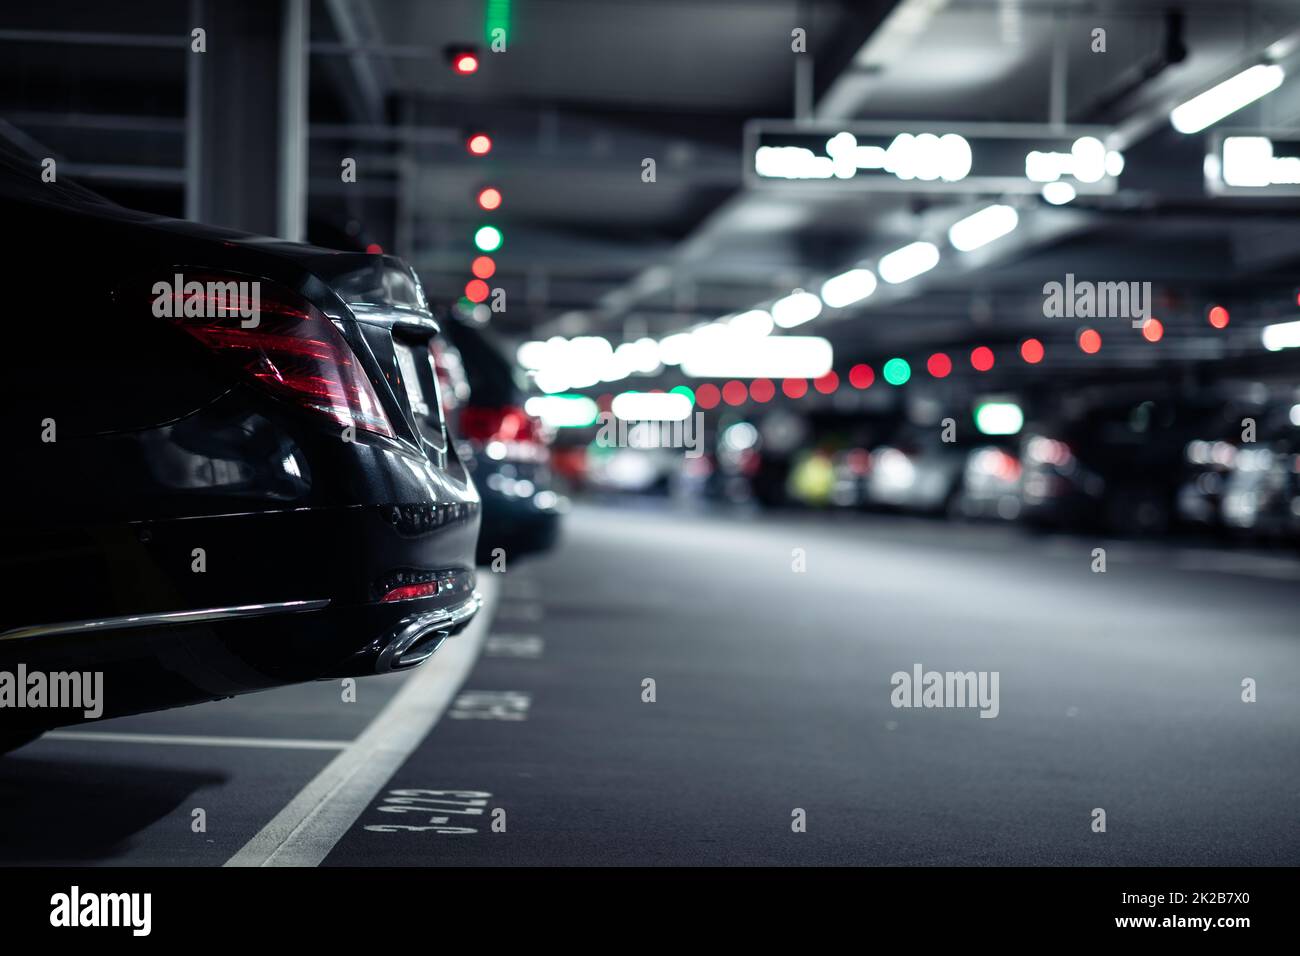 Underground garage or modern car parking with lots of vehicles Stock Photo